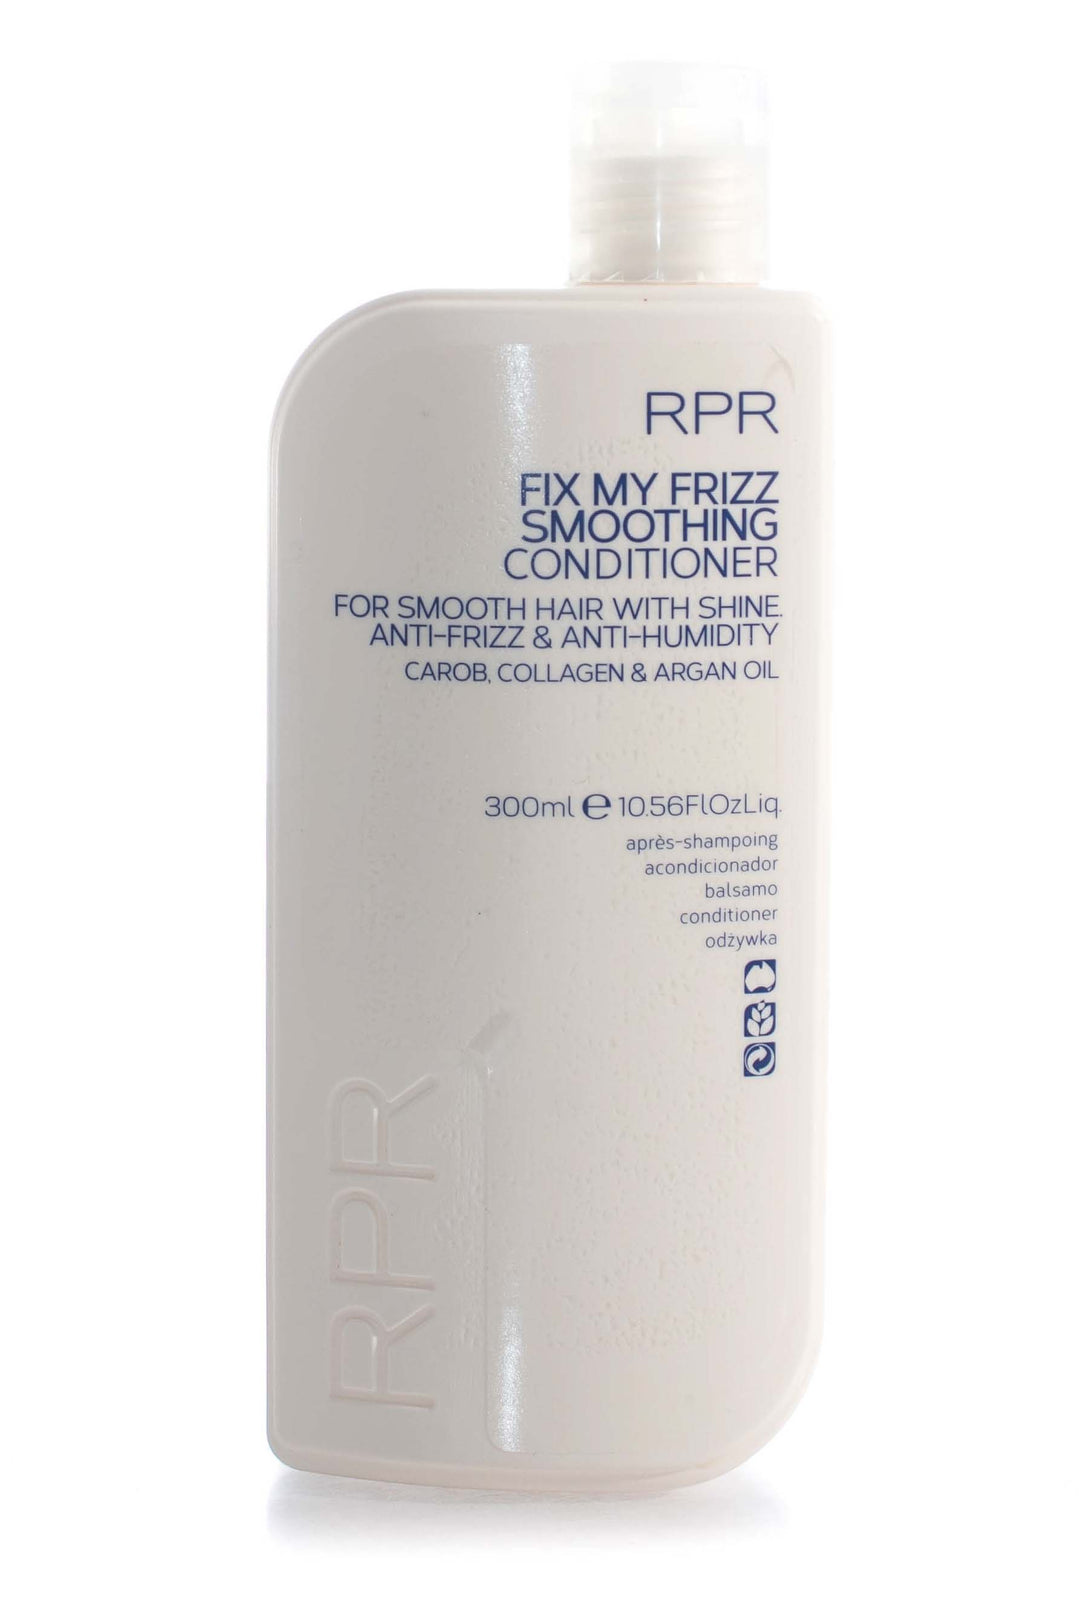 rpr-fix-my-frizz-smoothing-conditioner-300ml